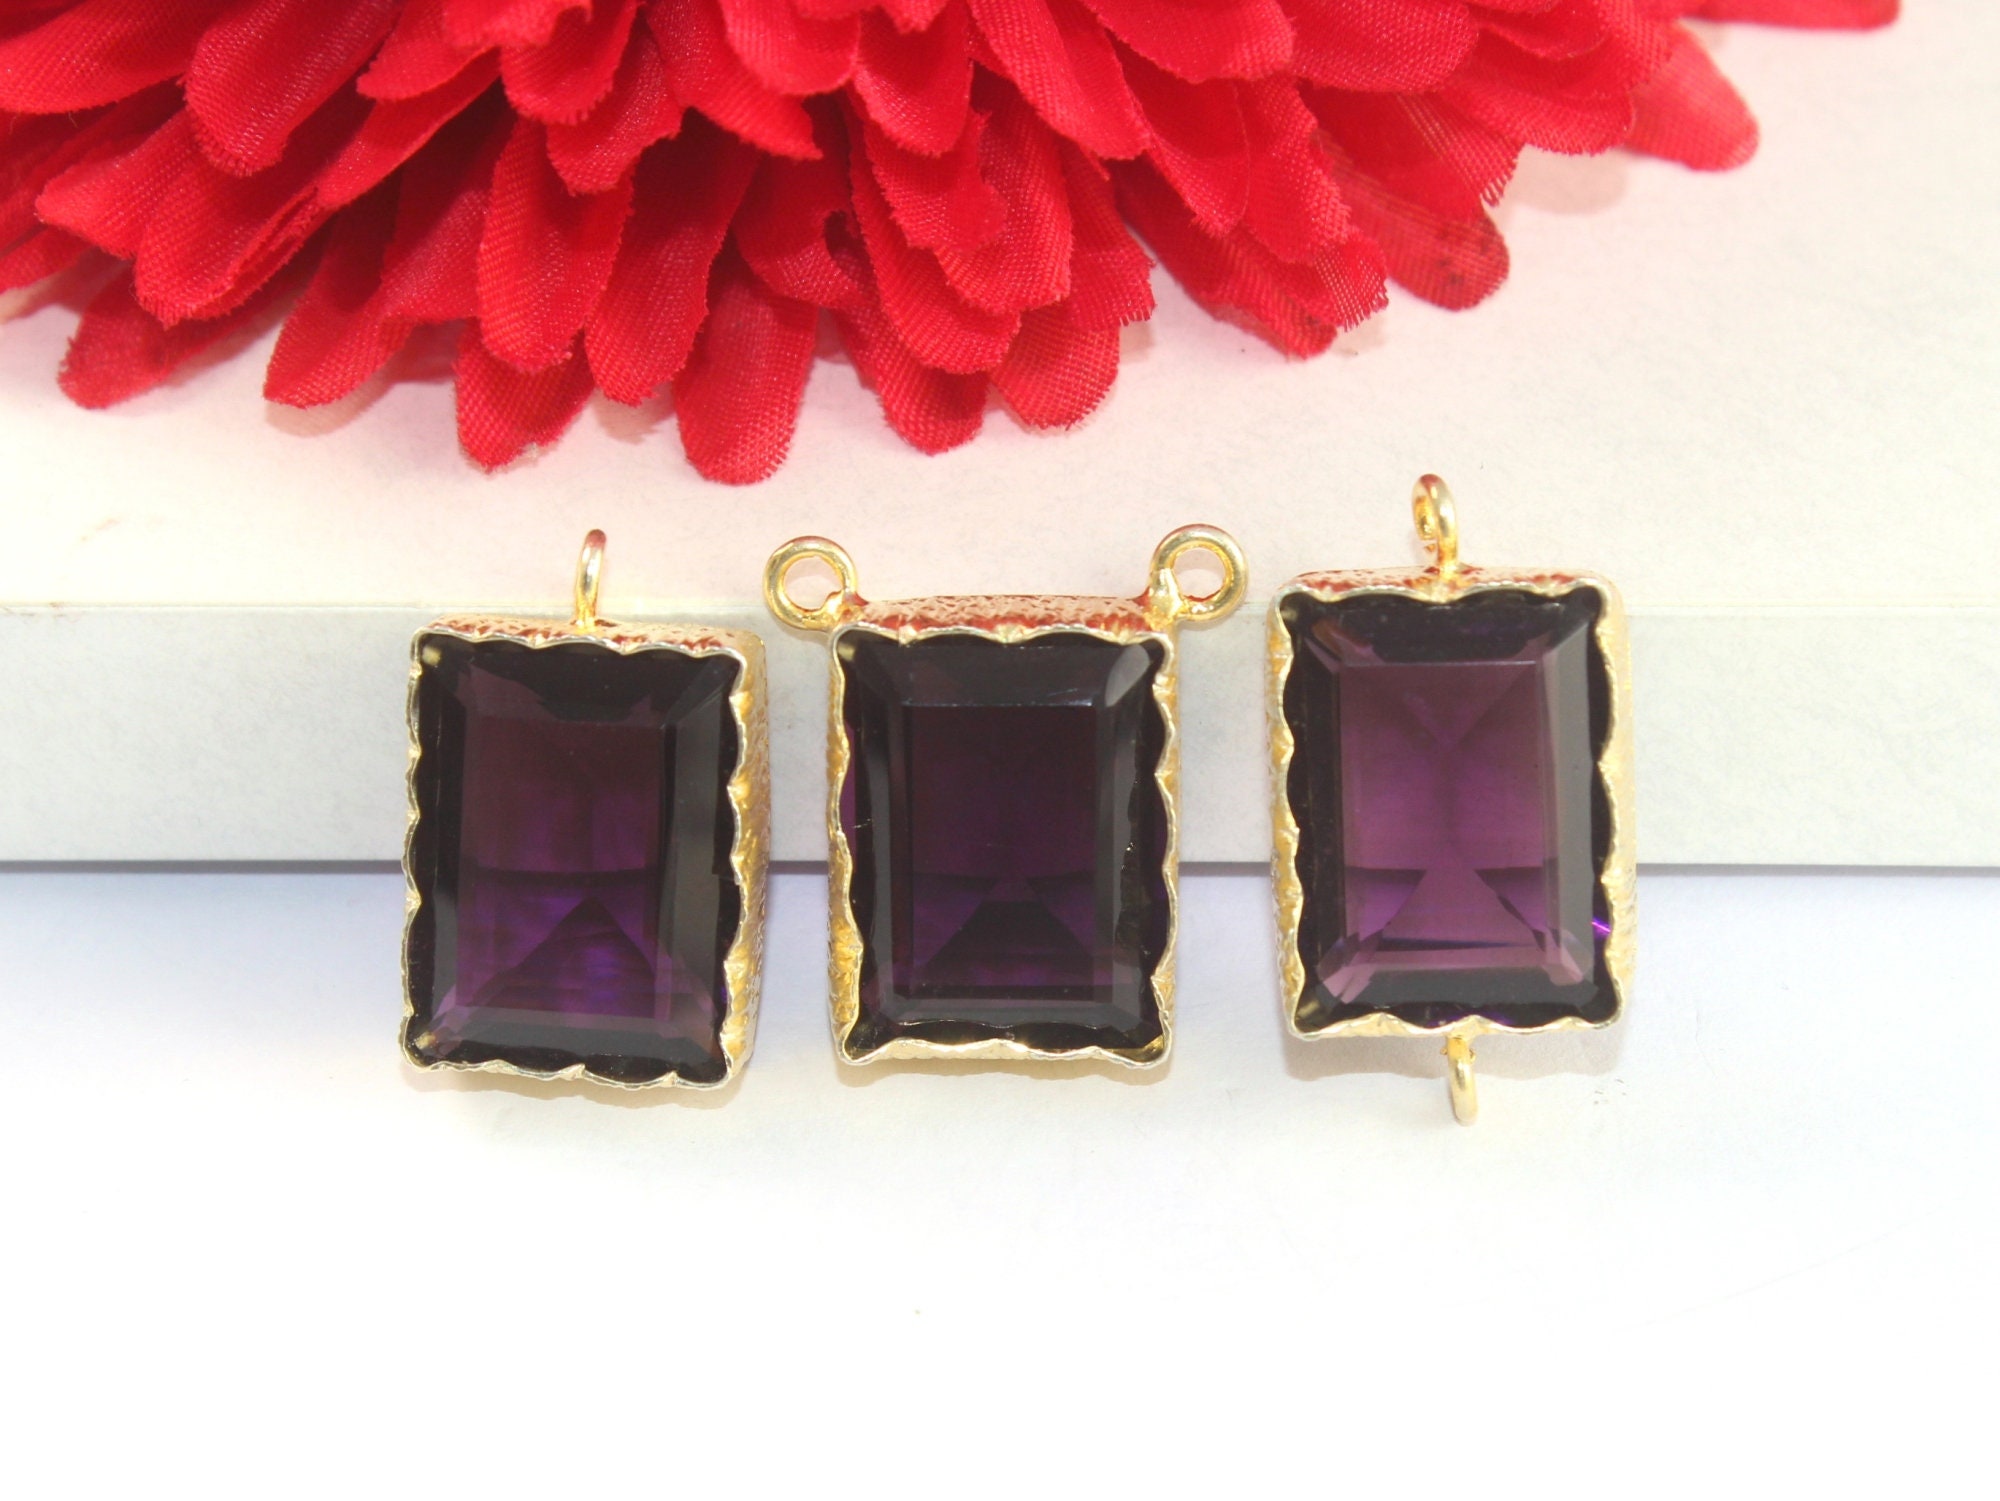 Amethyst Connector & Charm Pendant/19x15mm 22Kt Gold Plated Gemstone Earrings Bezel Set Pendants Jewelry Making Component